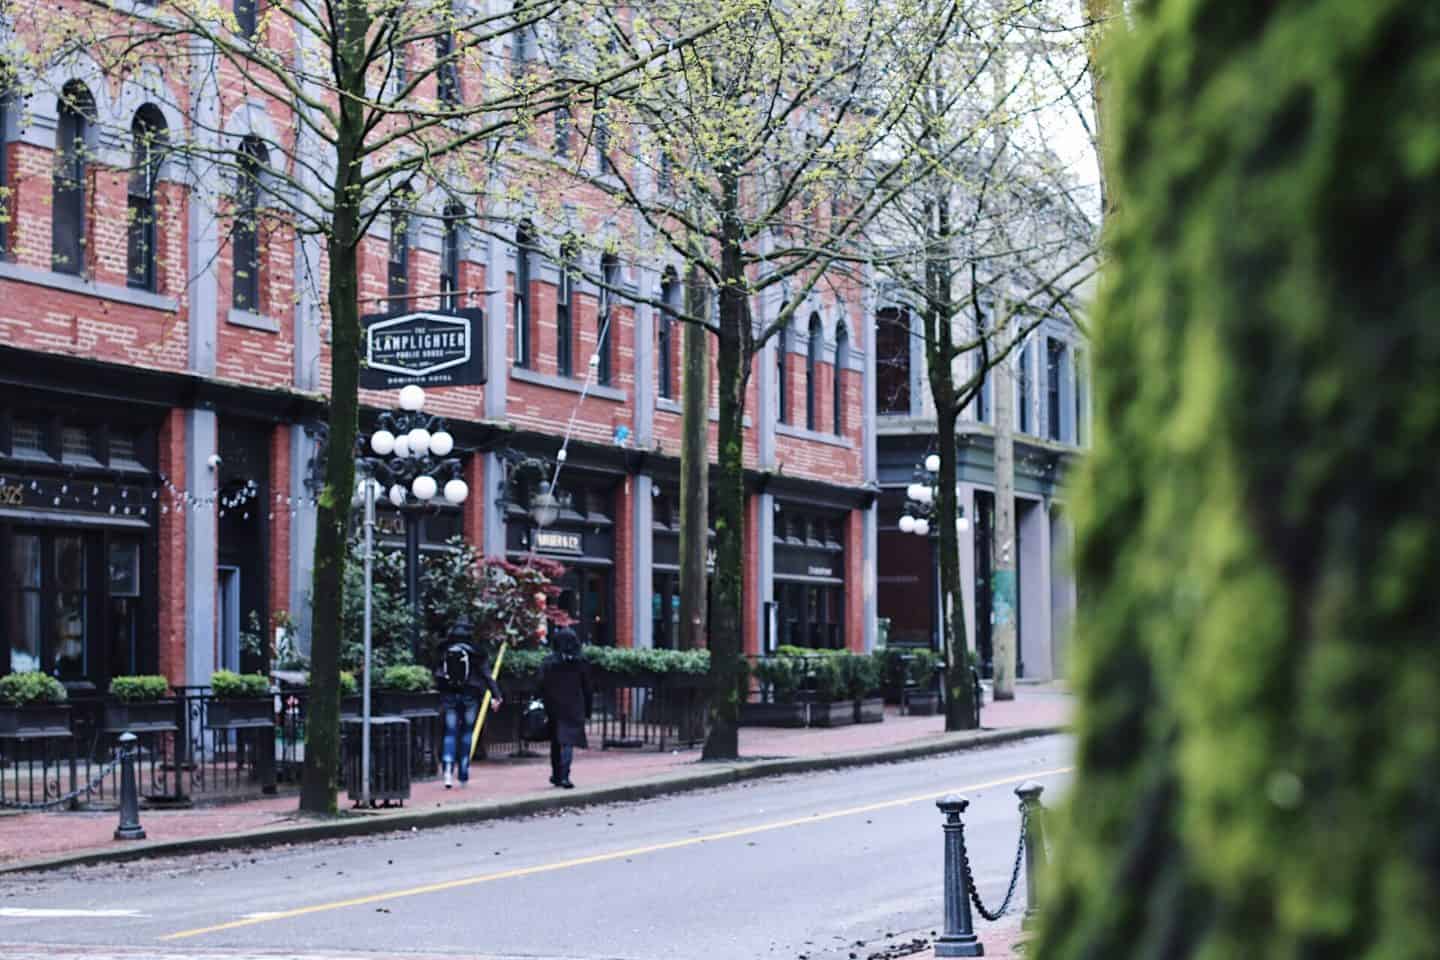 What to do in Gastown, Vancouver | best things to do in Gastown | top activities in Gastown, Vancouver, BC | how to spend a day in historical Gastown neighbourhood | best restaurants and cafes in Gastown | Diary of a Toronto Girl, a Canadian lifestyle blog